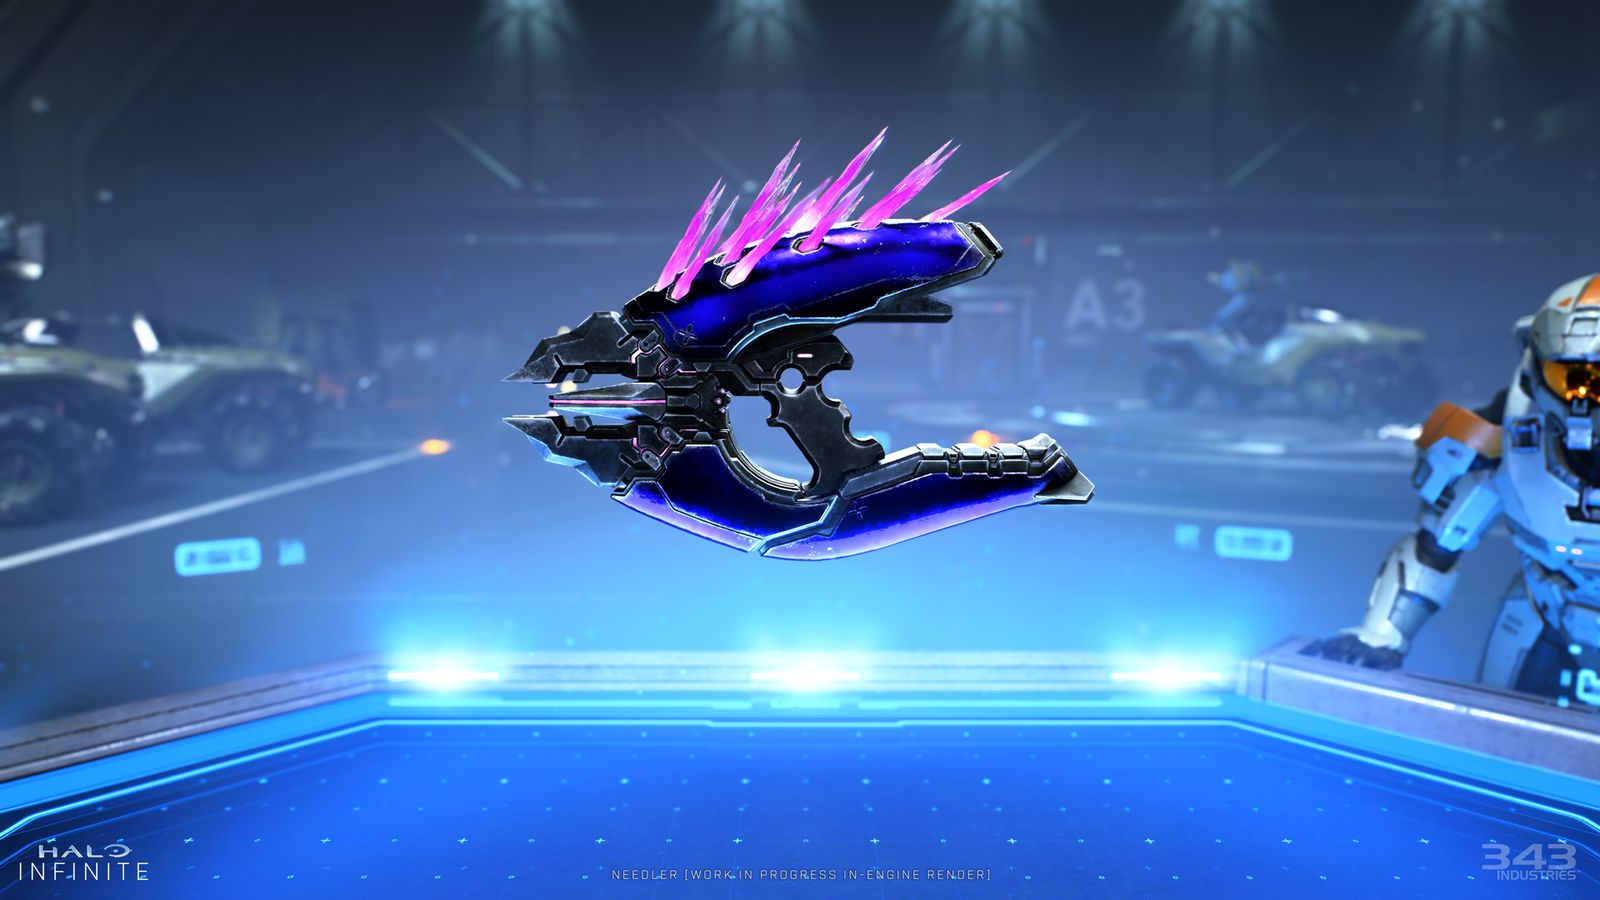 NEEDLER - The iconic weapon is back and looks better than ever